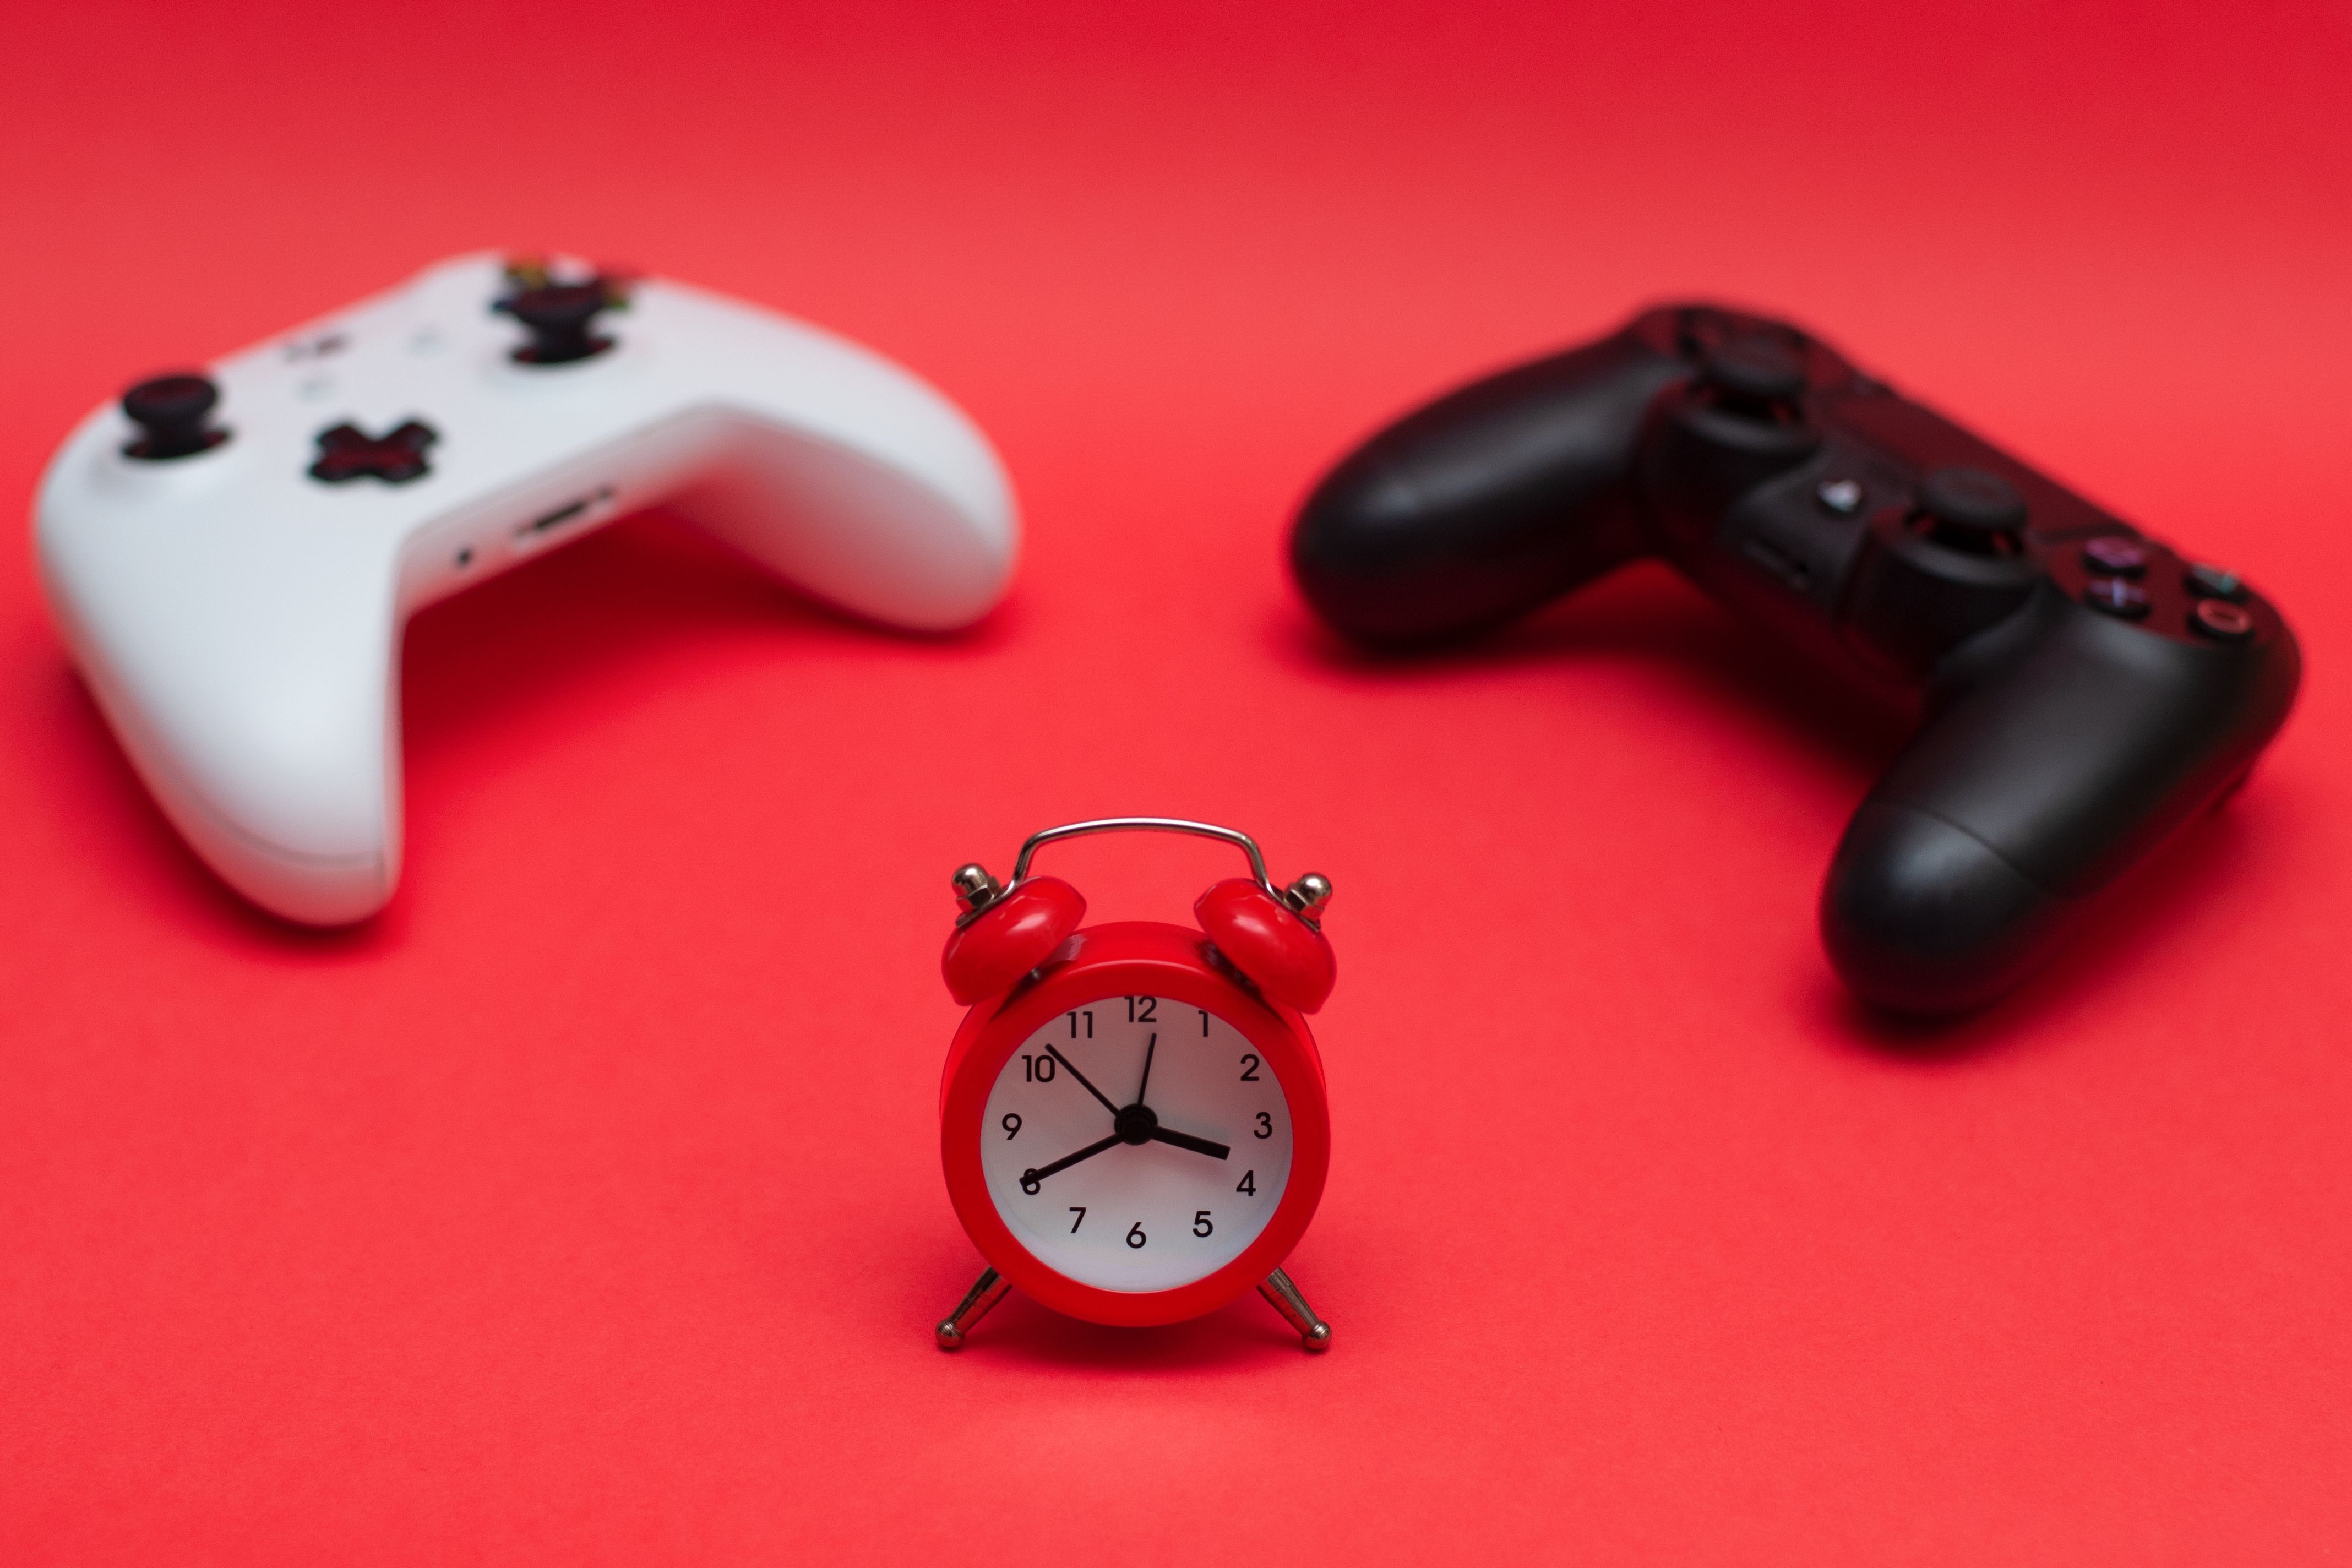 Two game console controllers with an alarm clock between them on a red background.